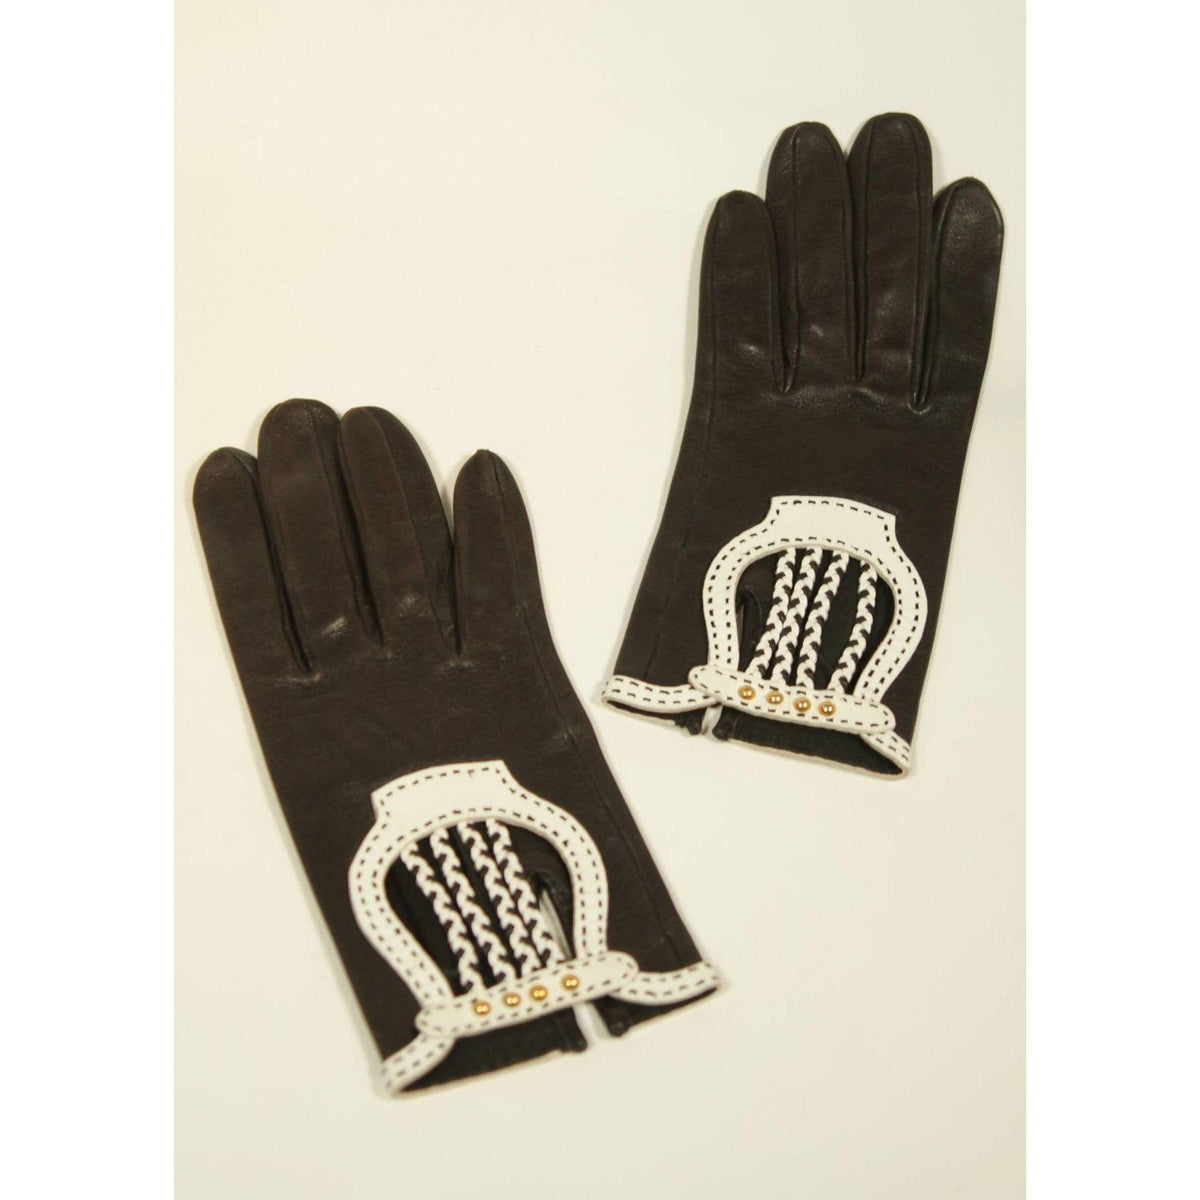 Pre-Owned HERMES Black Leather Gloves with White Accents | Size 6 1/2 - theREMODA